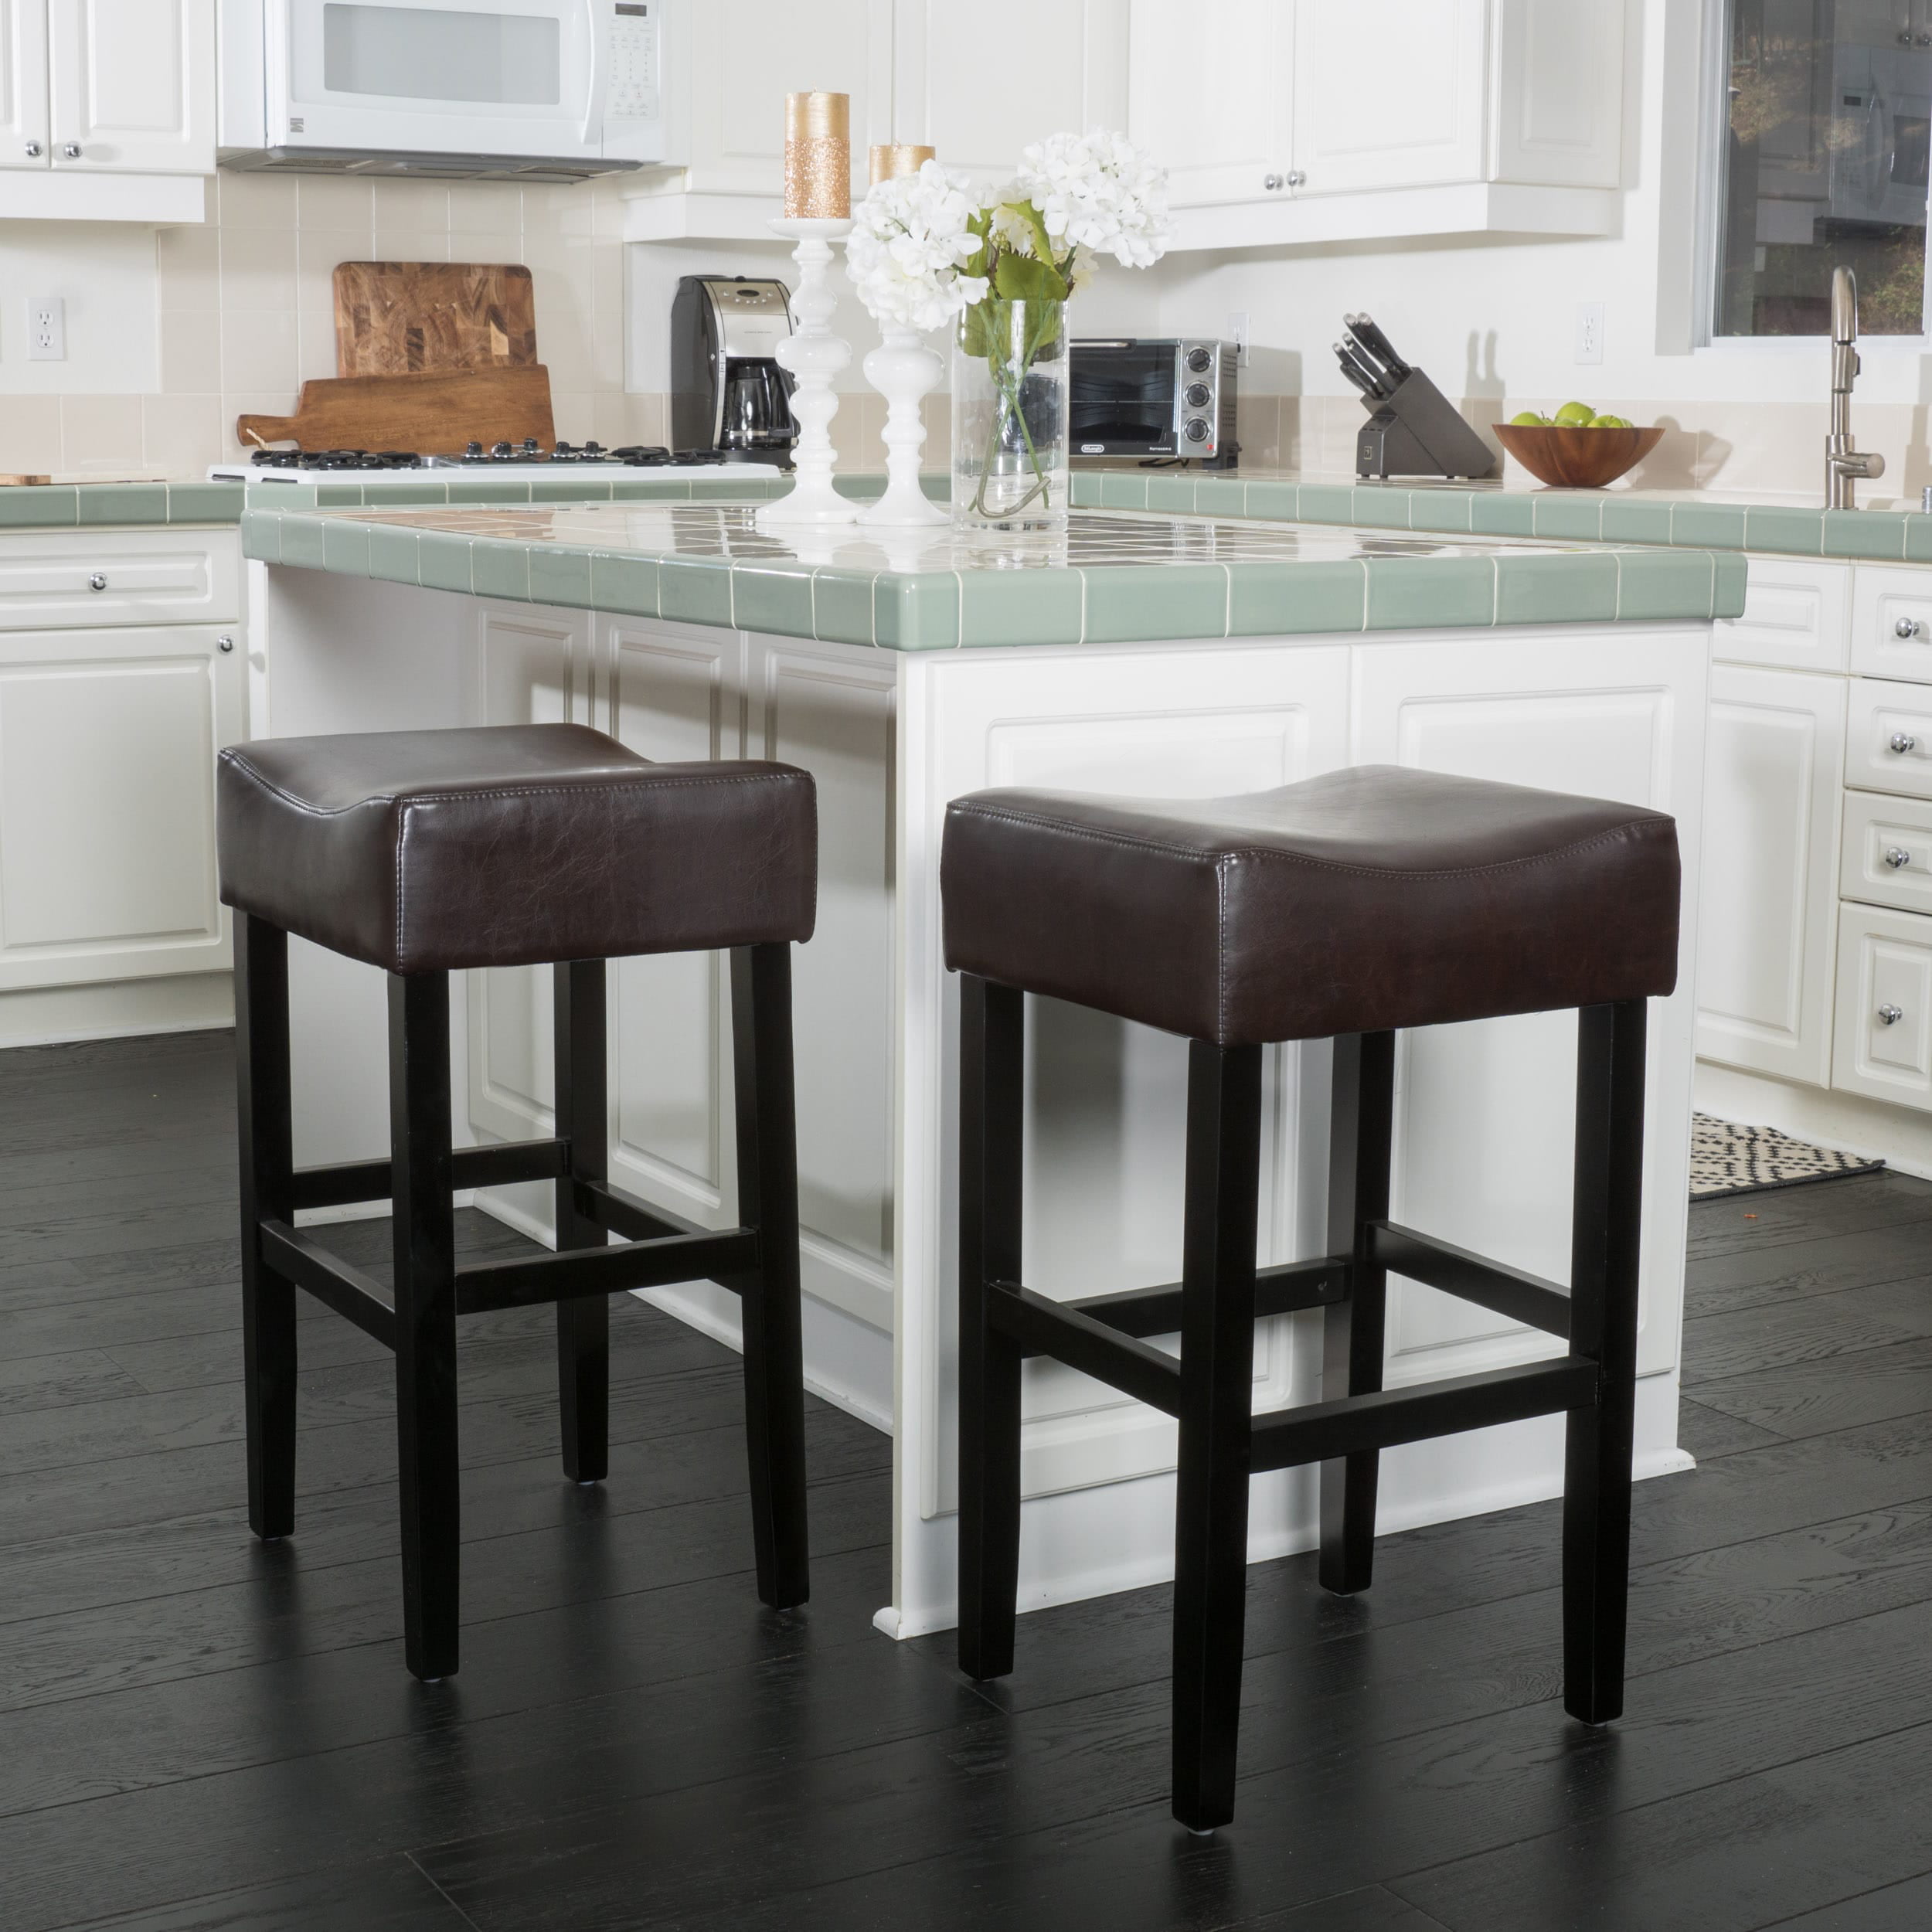 Christopher Knight Home Portman 30 Inch, Leather Backless Bar Stools